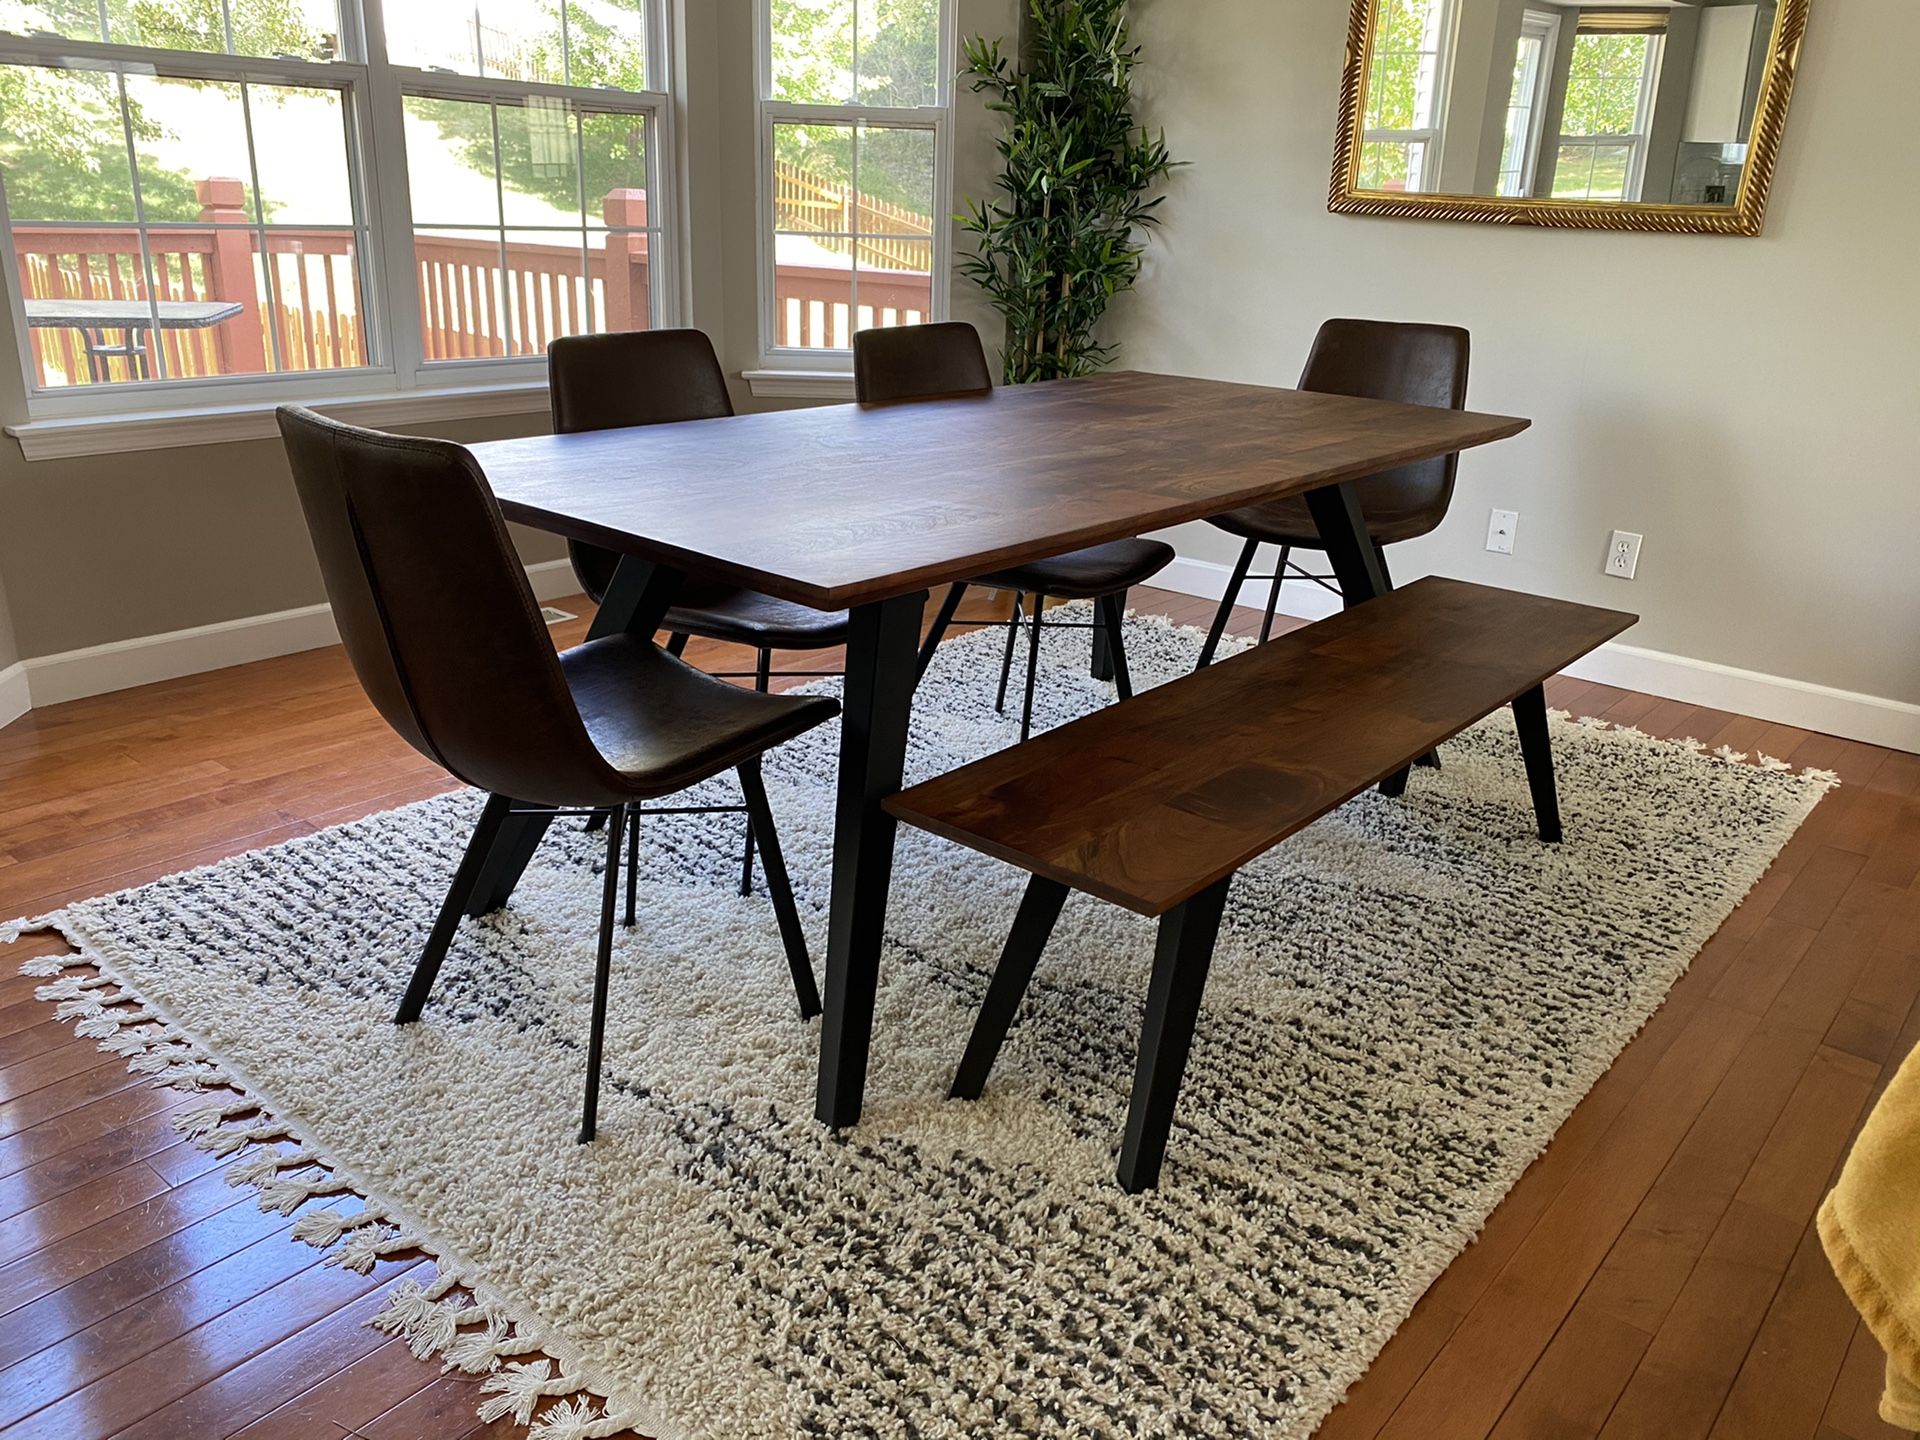 Kitchen or dining table set